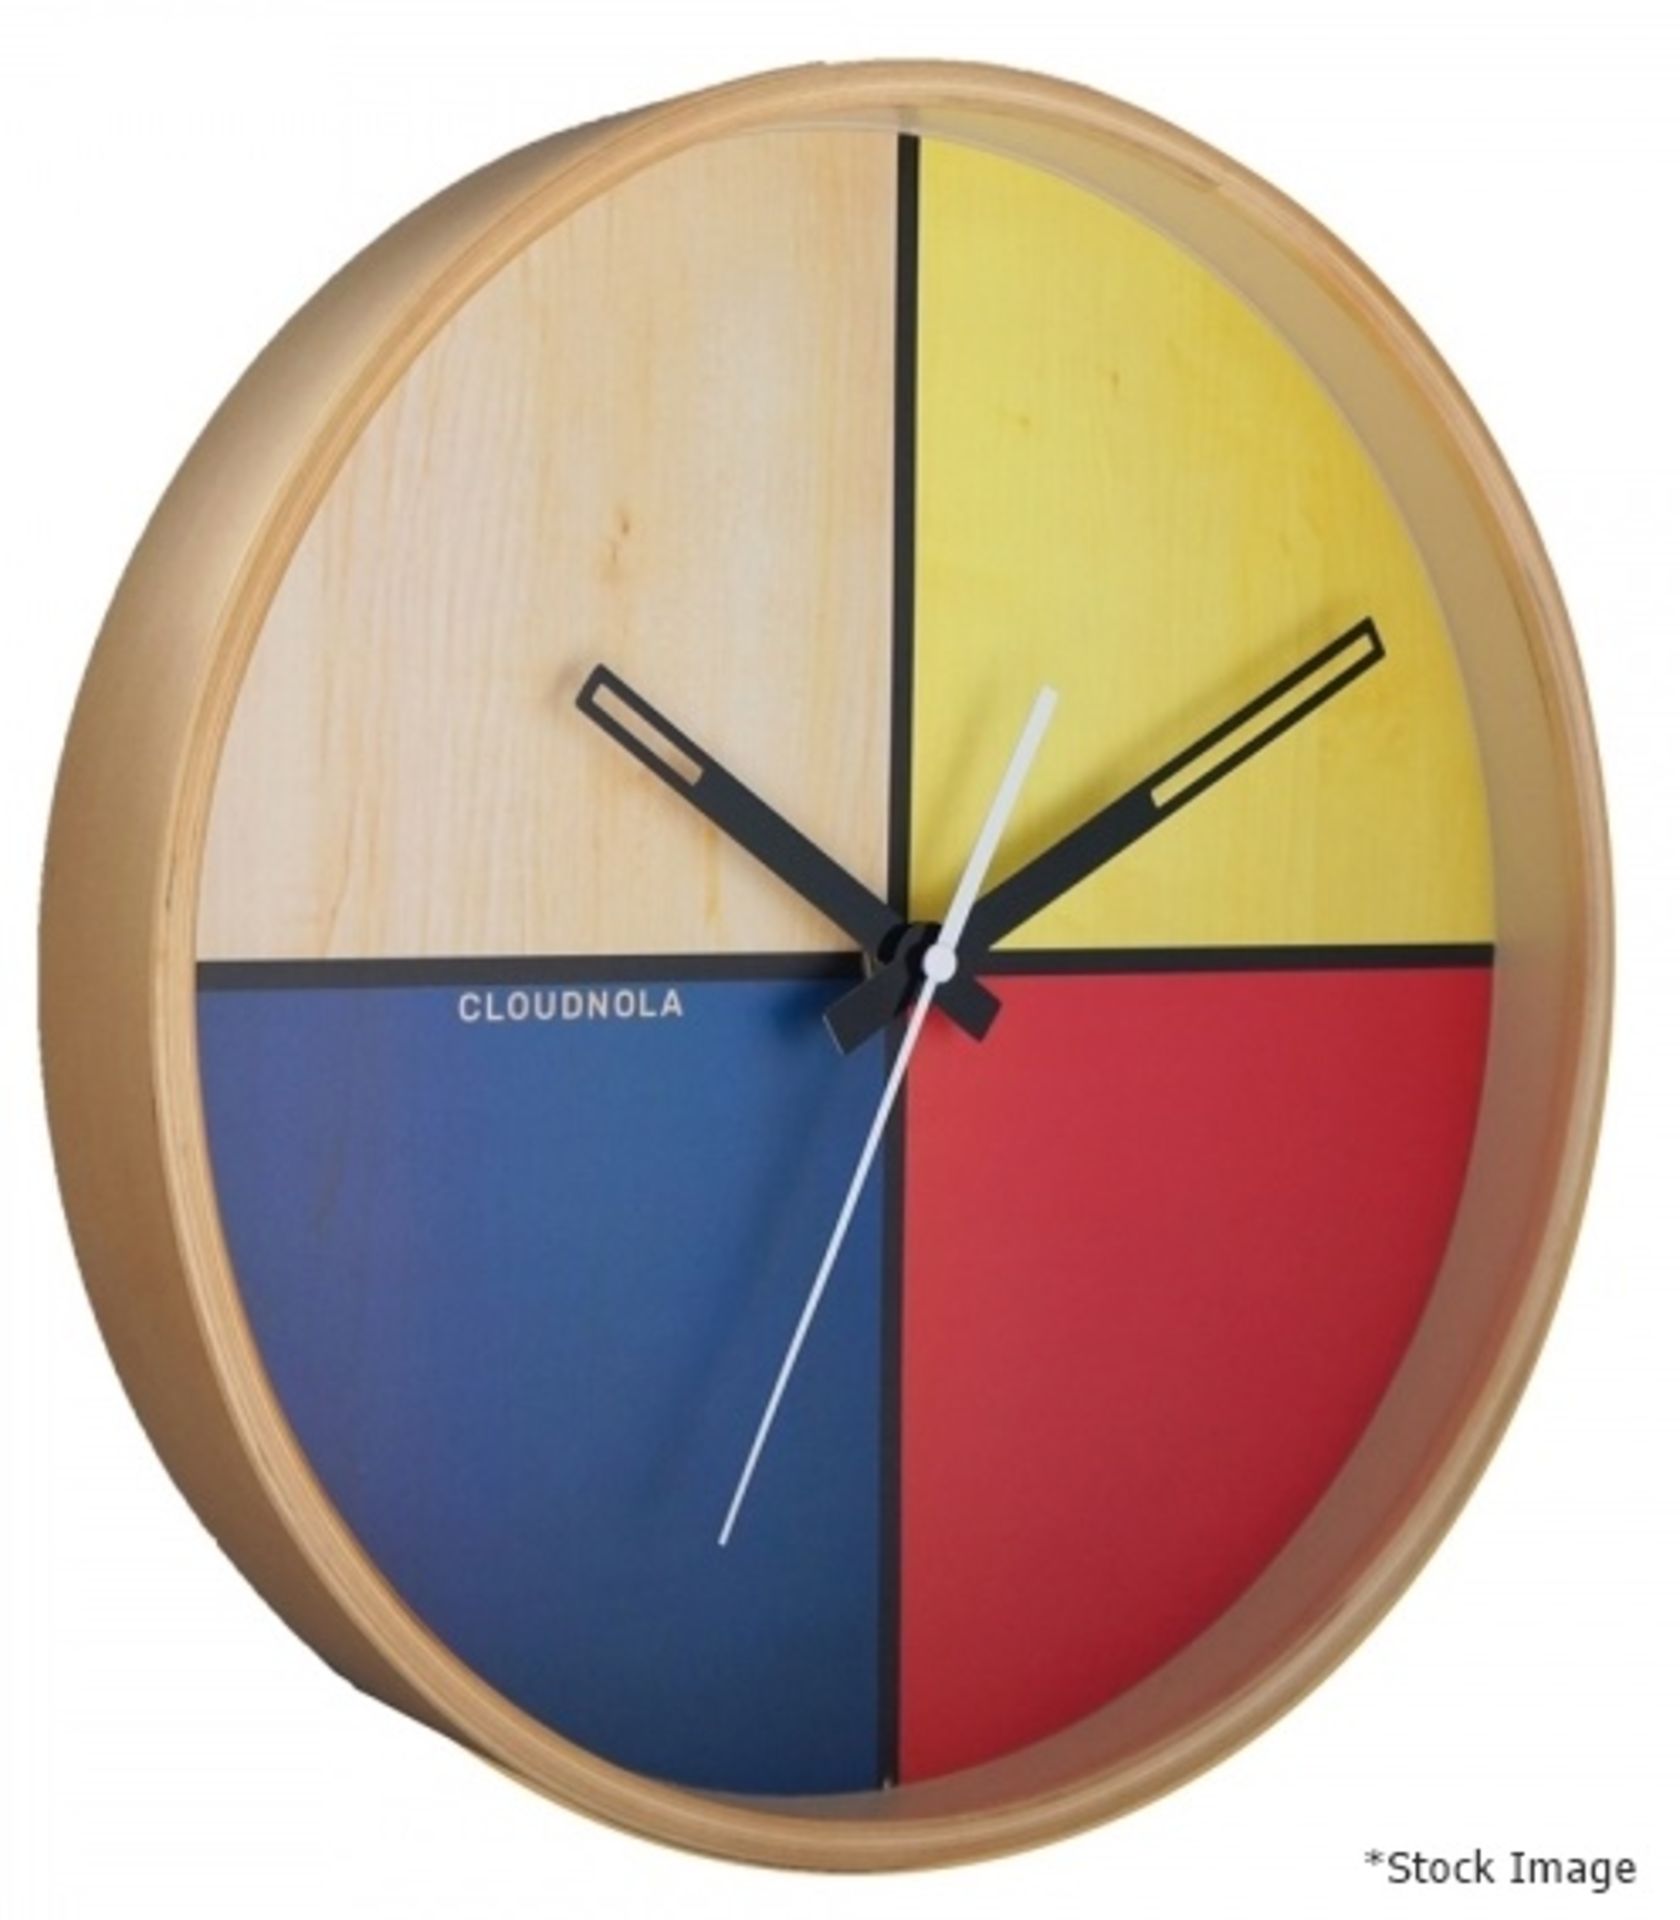 1 x CLOUDNOLA Contemporary Flur Yellow, Red, Blue & Birch Wall Clock With Offset Wooden Rim 30cm